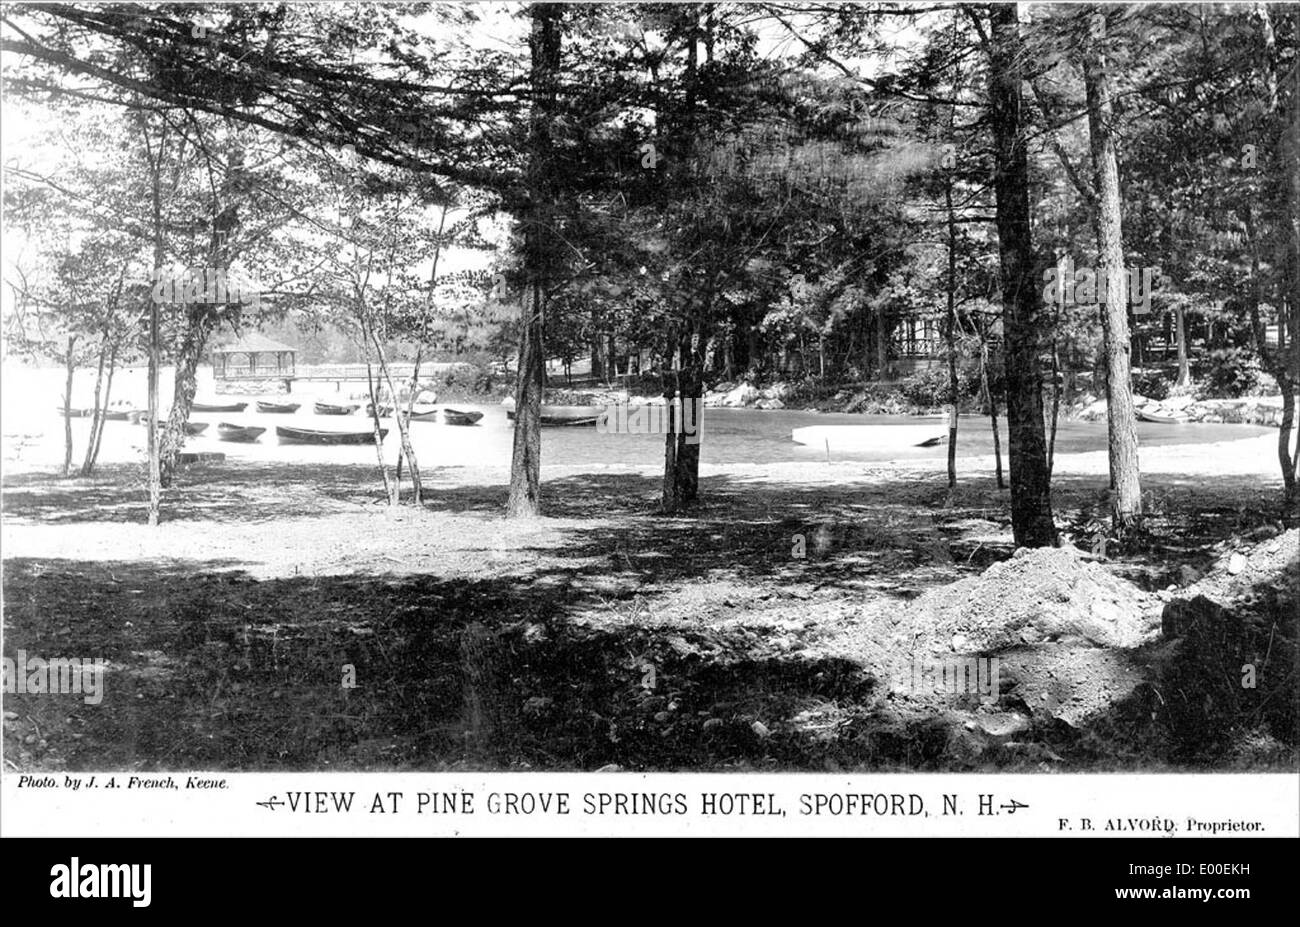 Pine Grove Springs Hotel on Spofford Lake in Chesterfield, New Hampshire Stock Photo